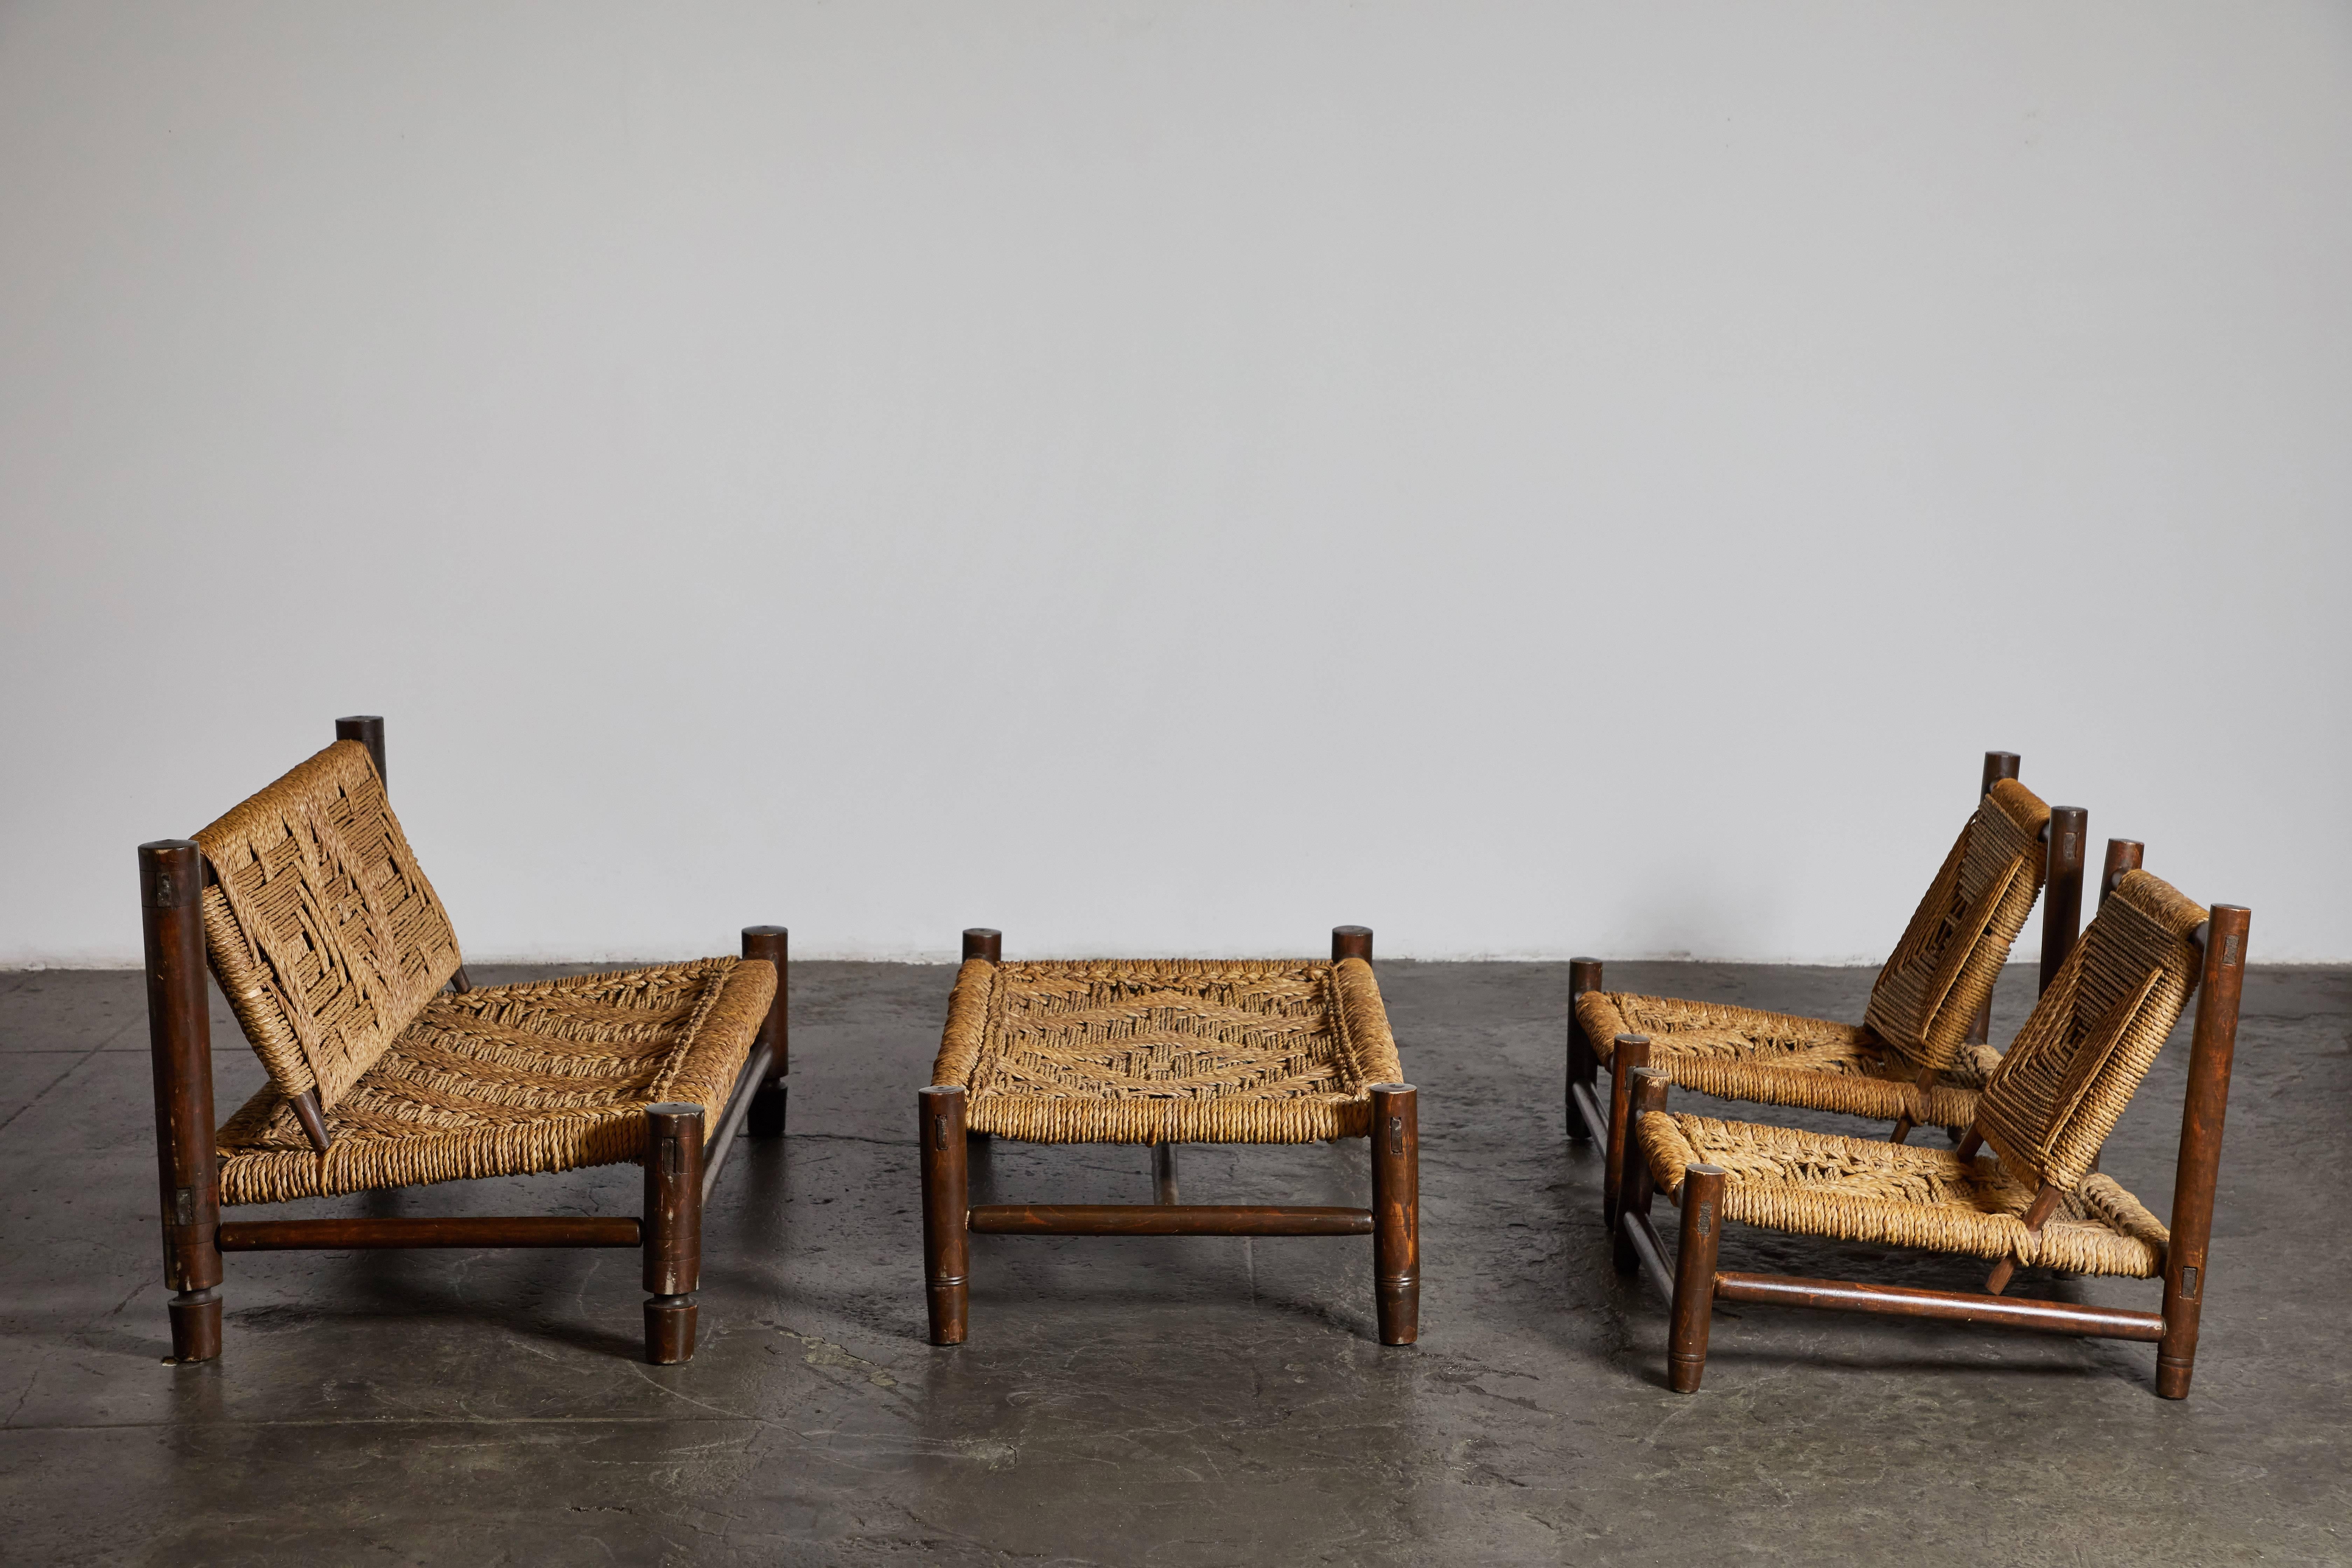 Stained beech and abaca rope set by Adrien Audoux and Frida Minet. Made in France, circa 1950s.
All pieces sold separately. Chairs sold as a pair. 

Chairs
Dimensions 25.8” H x 24.5” W x 27” D 

Bench
Dimensions 14” H x 45.5” W x 27” D